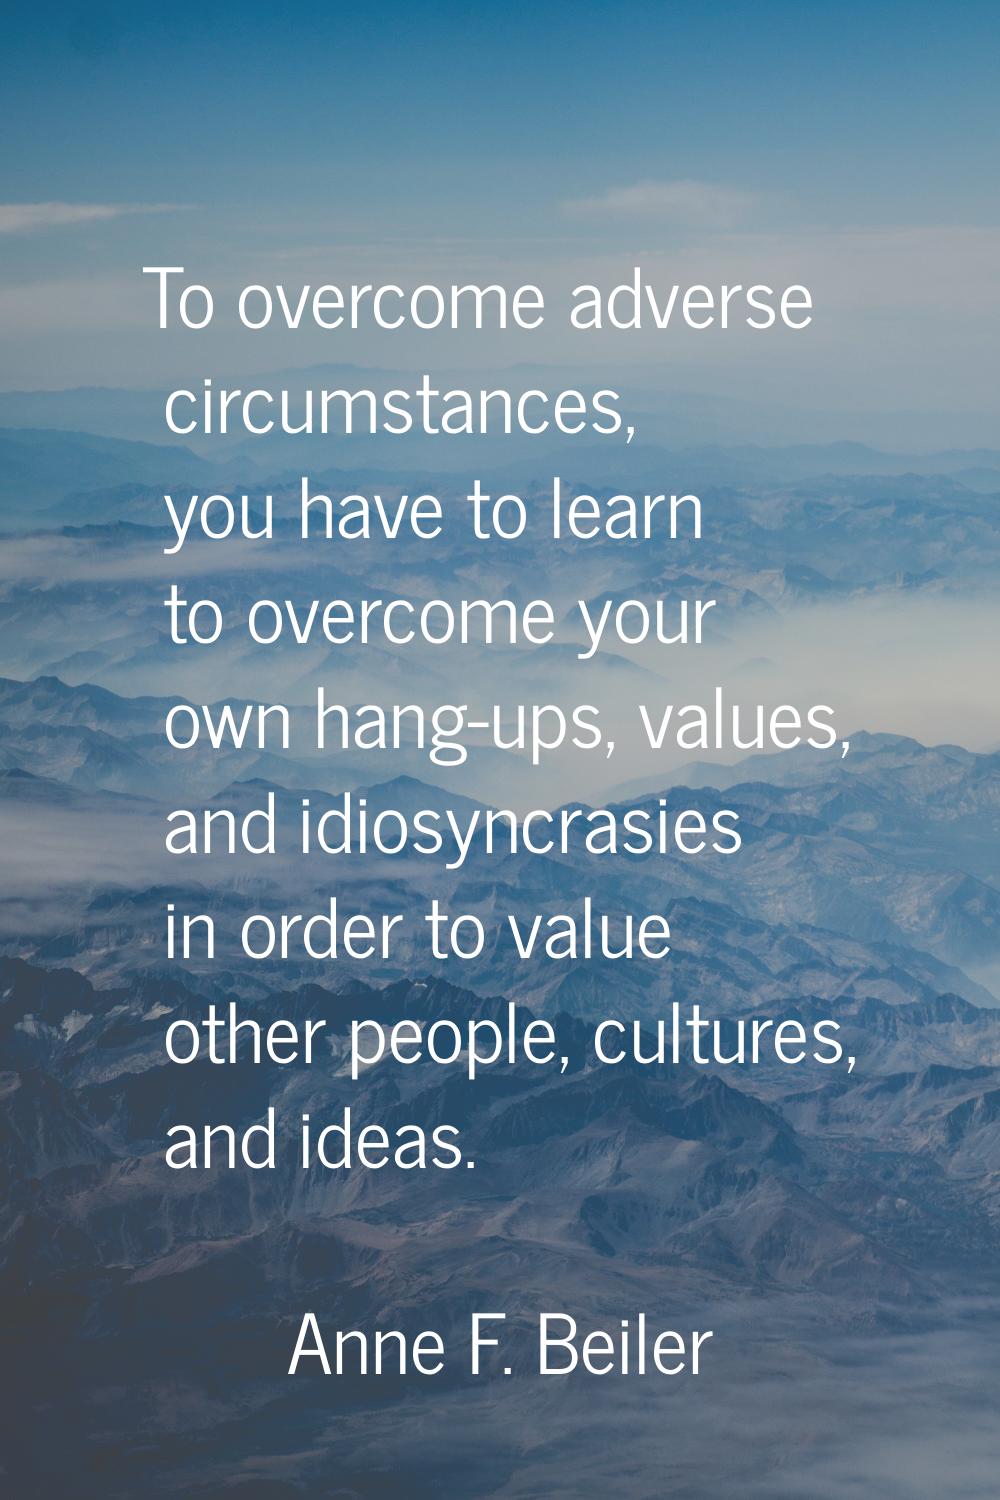 To overcome adverse circumstances, you have to learn to overcome your own hang-ups, values, and idi